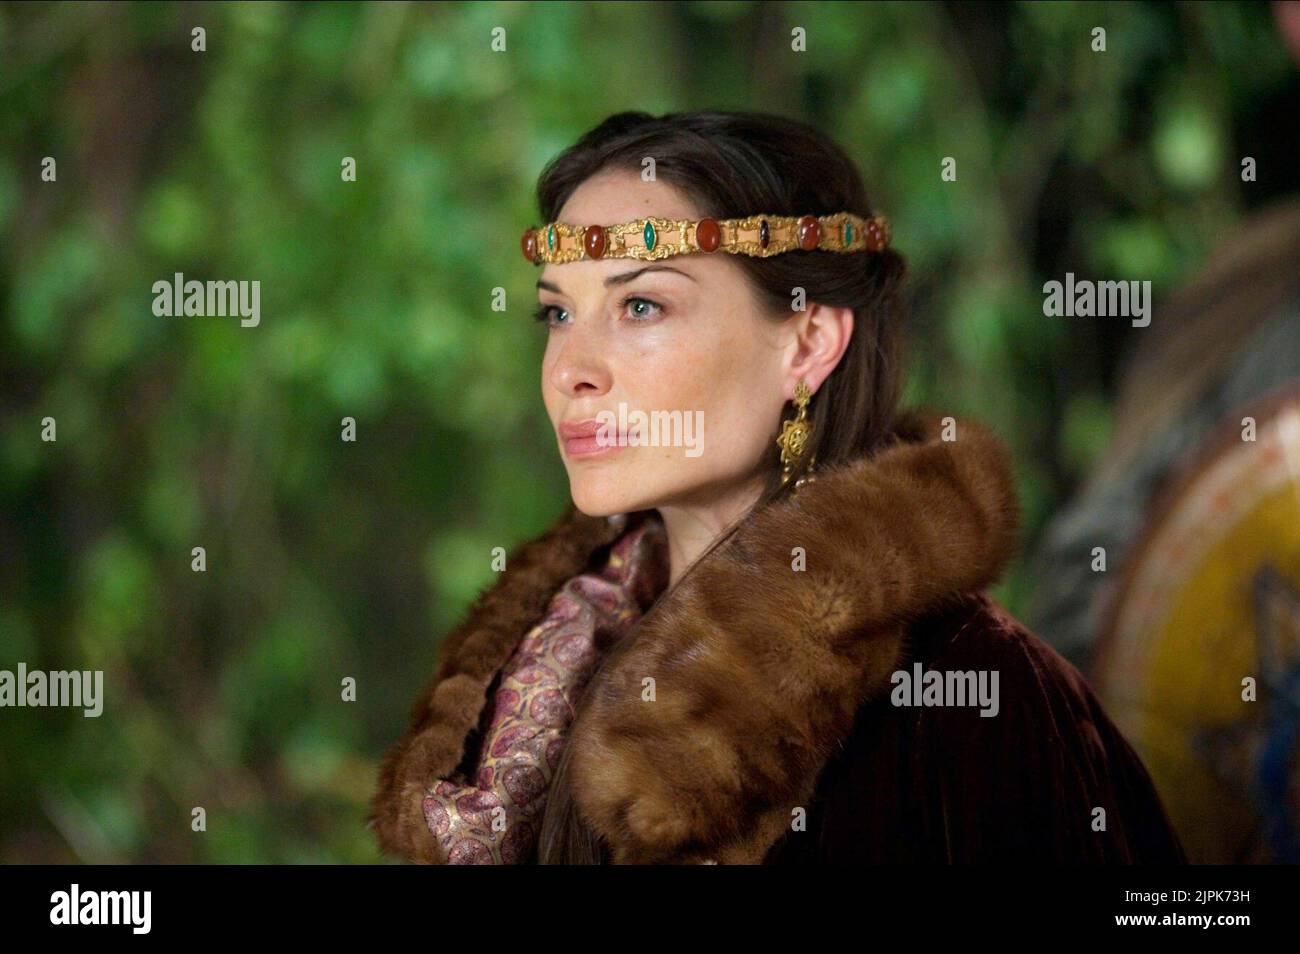 CLAIRE FORLANI, CAMELOT, 2011 Stock Photo